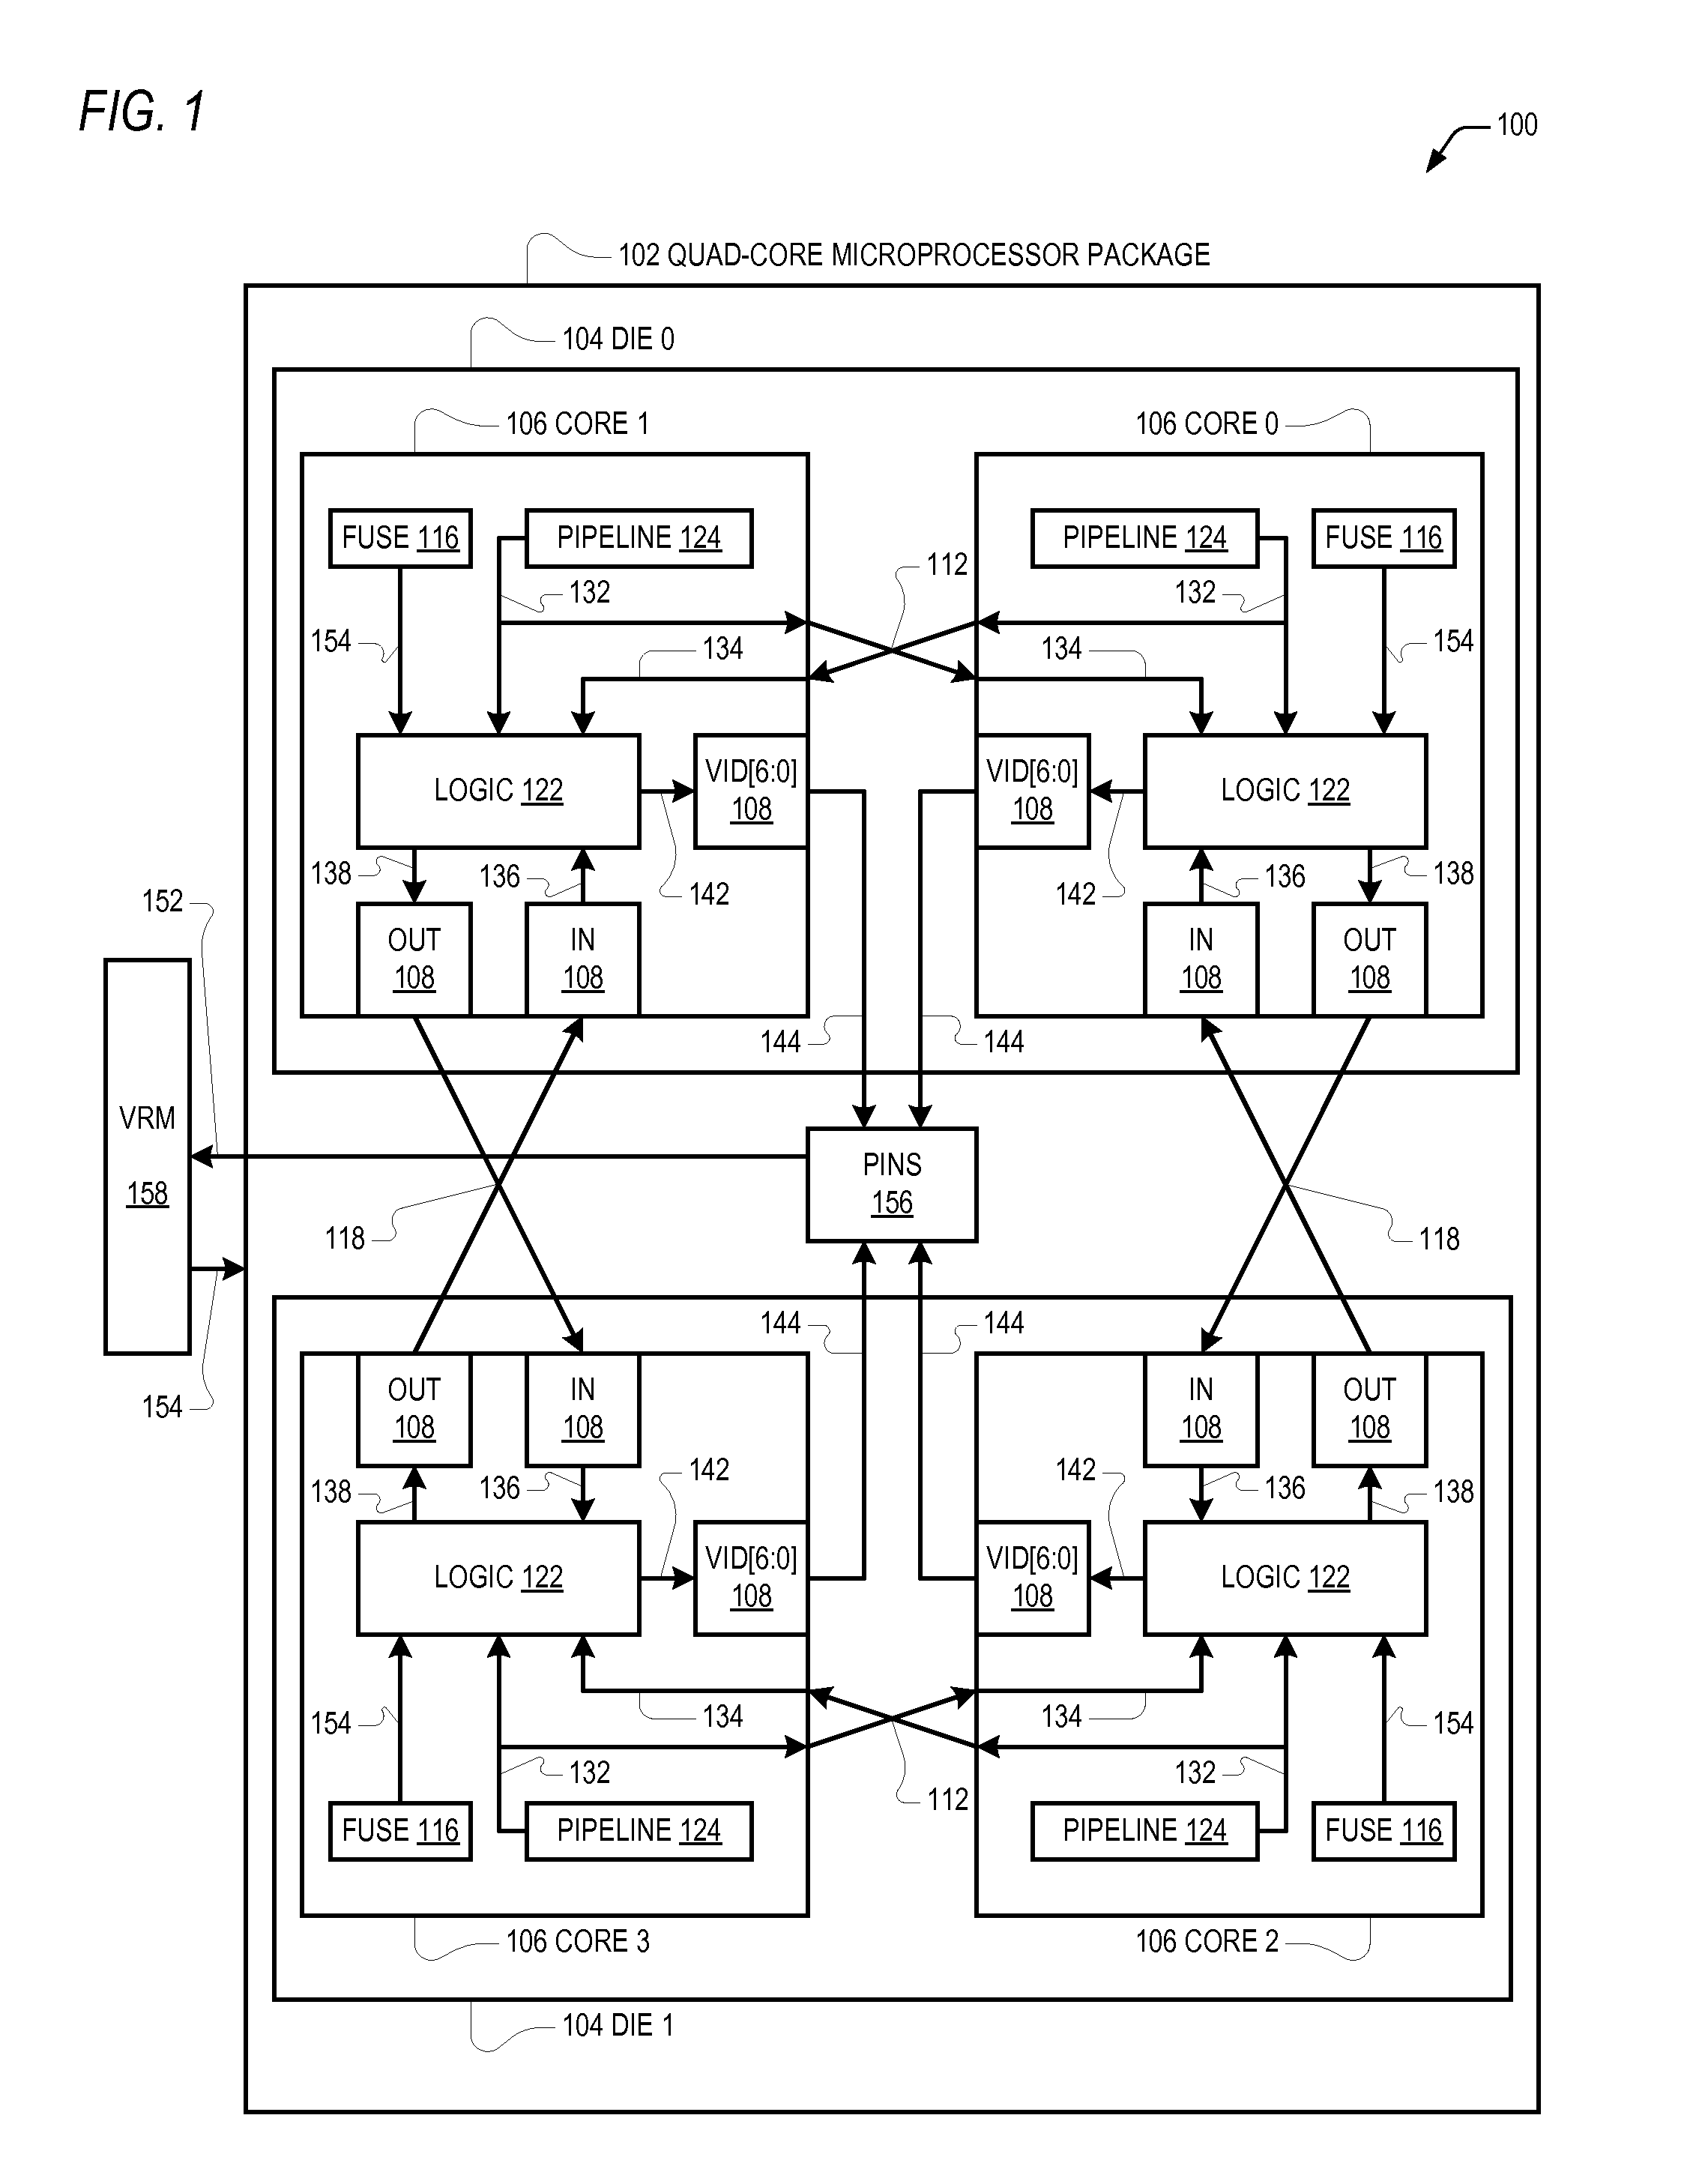 Distributed management of a shared power source to a multi-core microprocessor